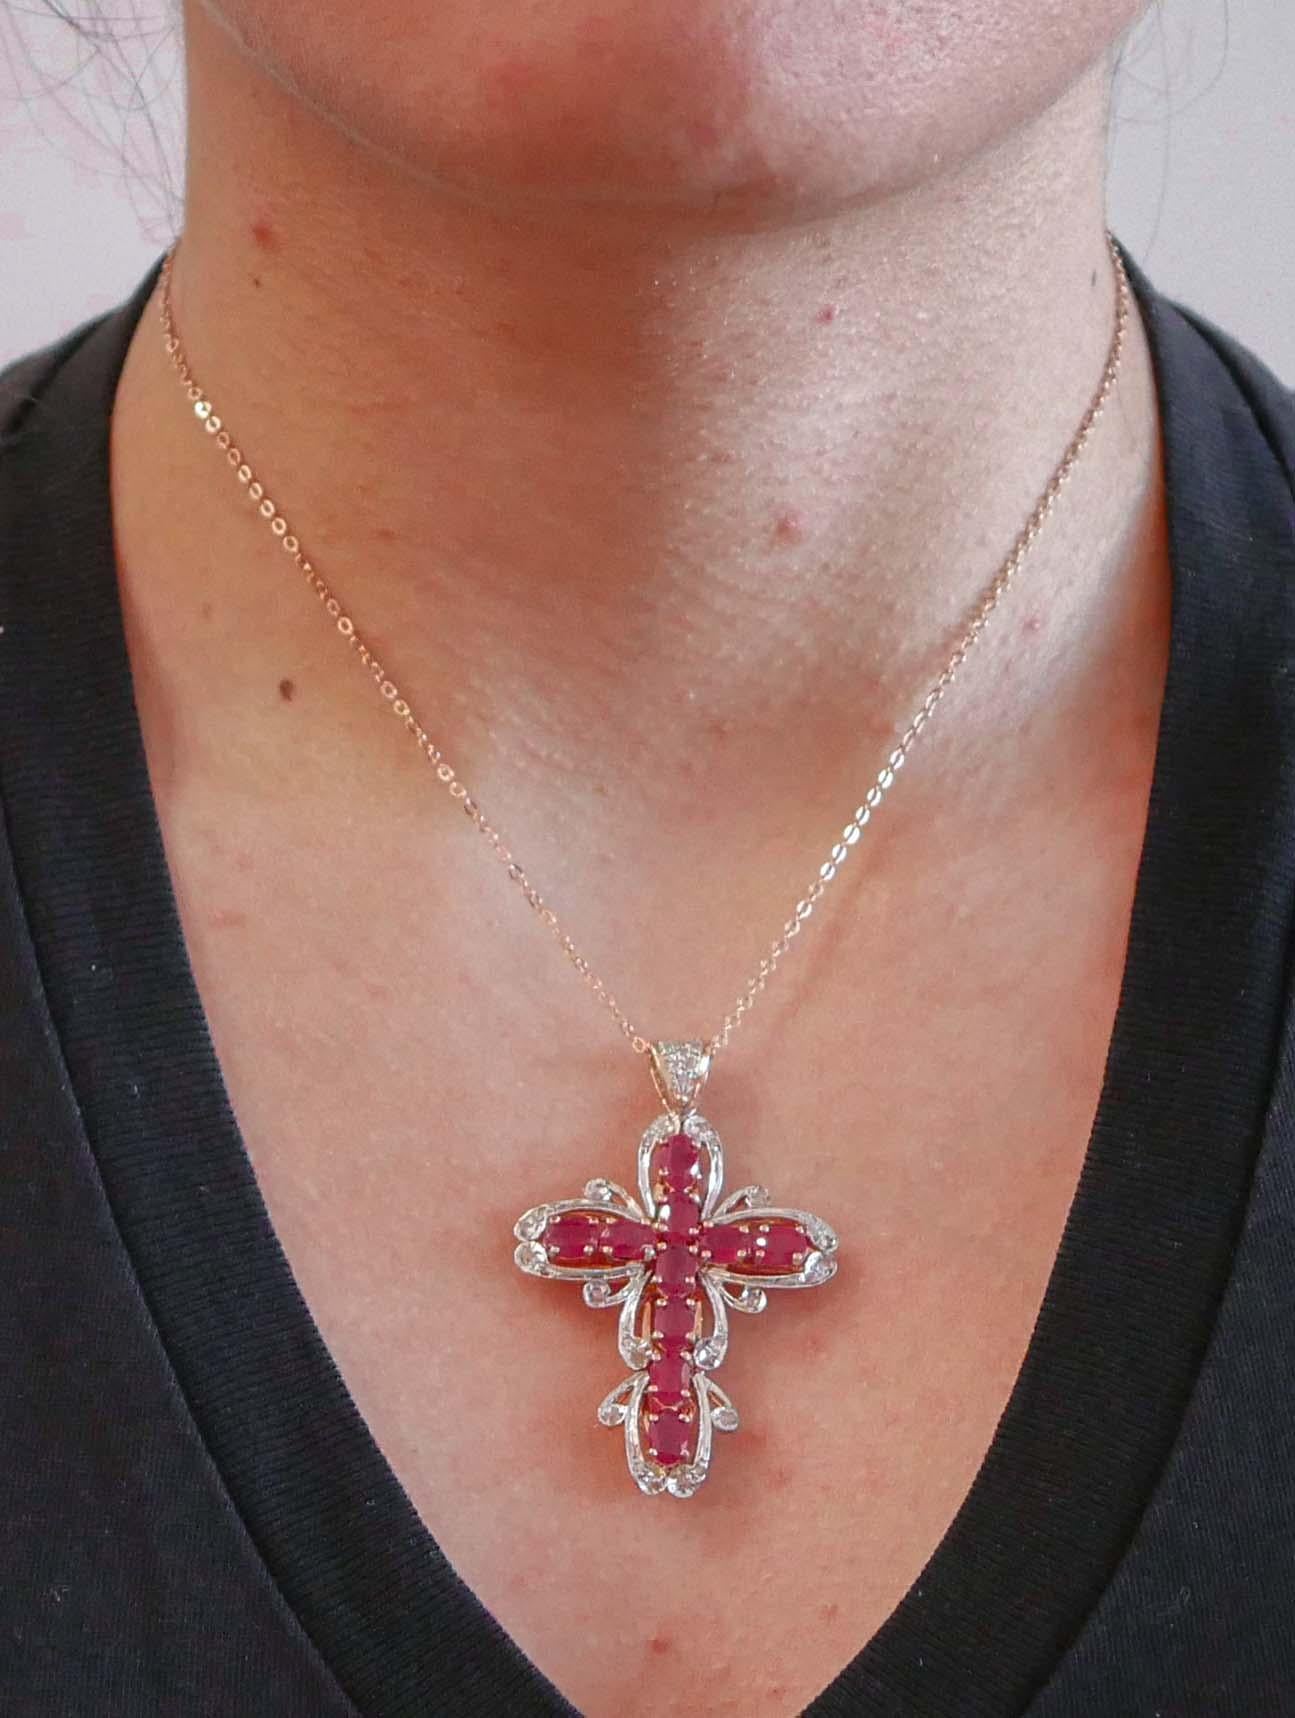 Women's Rubies, Diamonds, Rose Gold and Silver Cross Pendant Necklace. For Sale